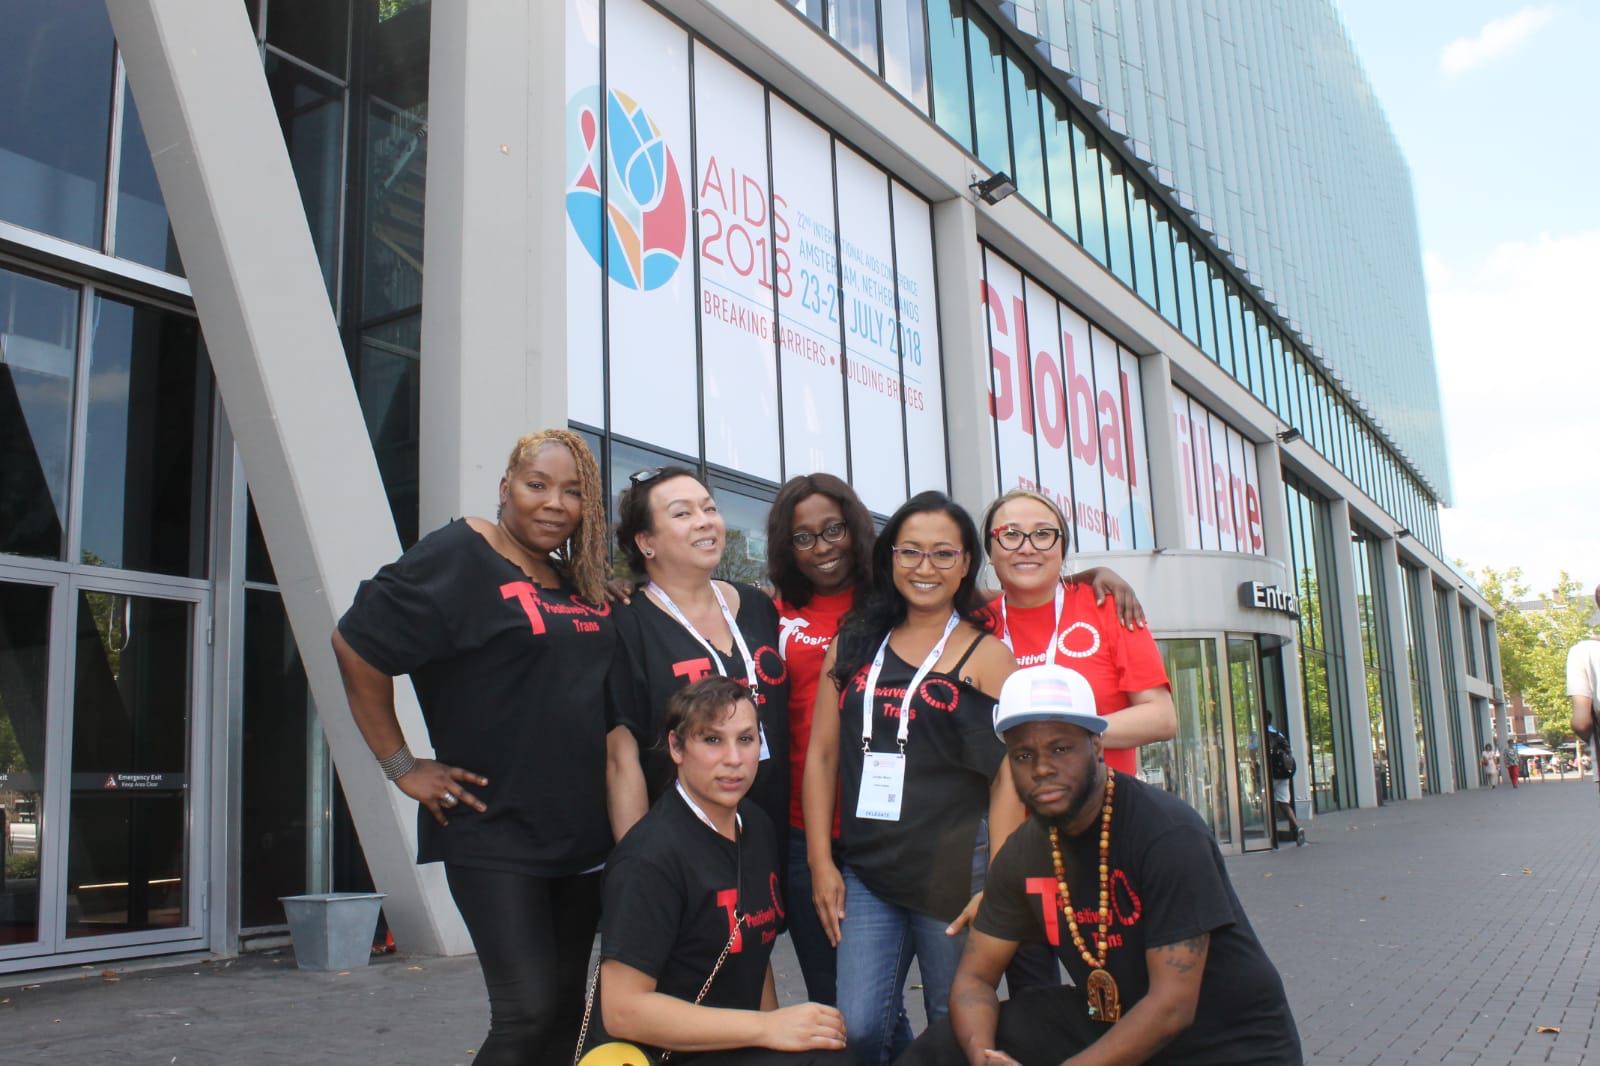 US trans advocates of color pose in front of conference center with AIDS 2018 banner